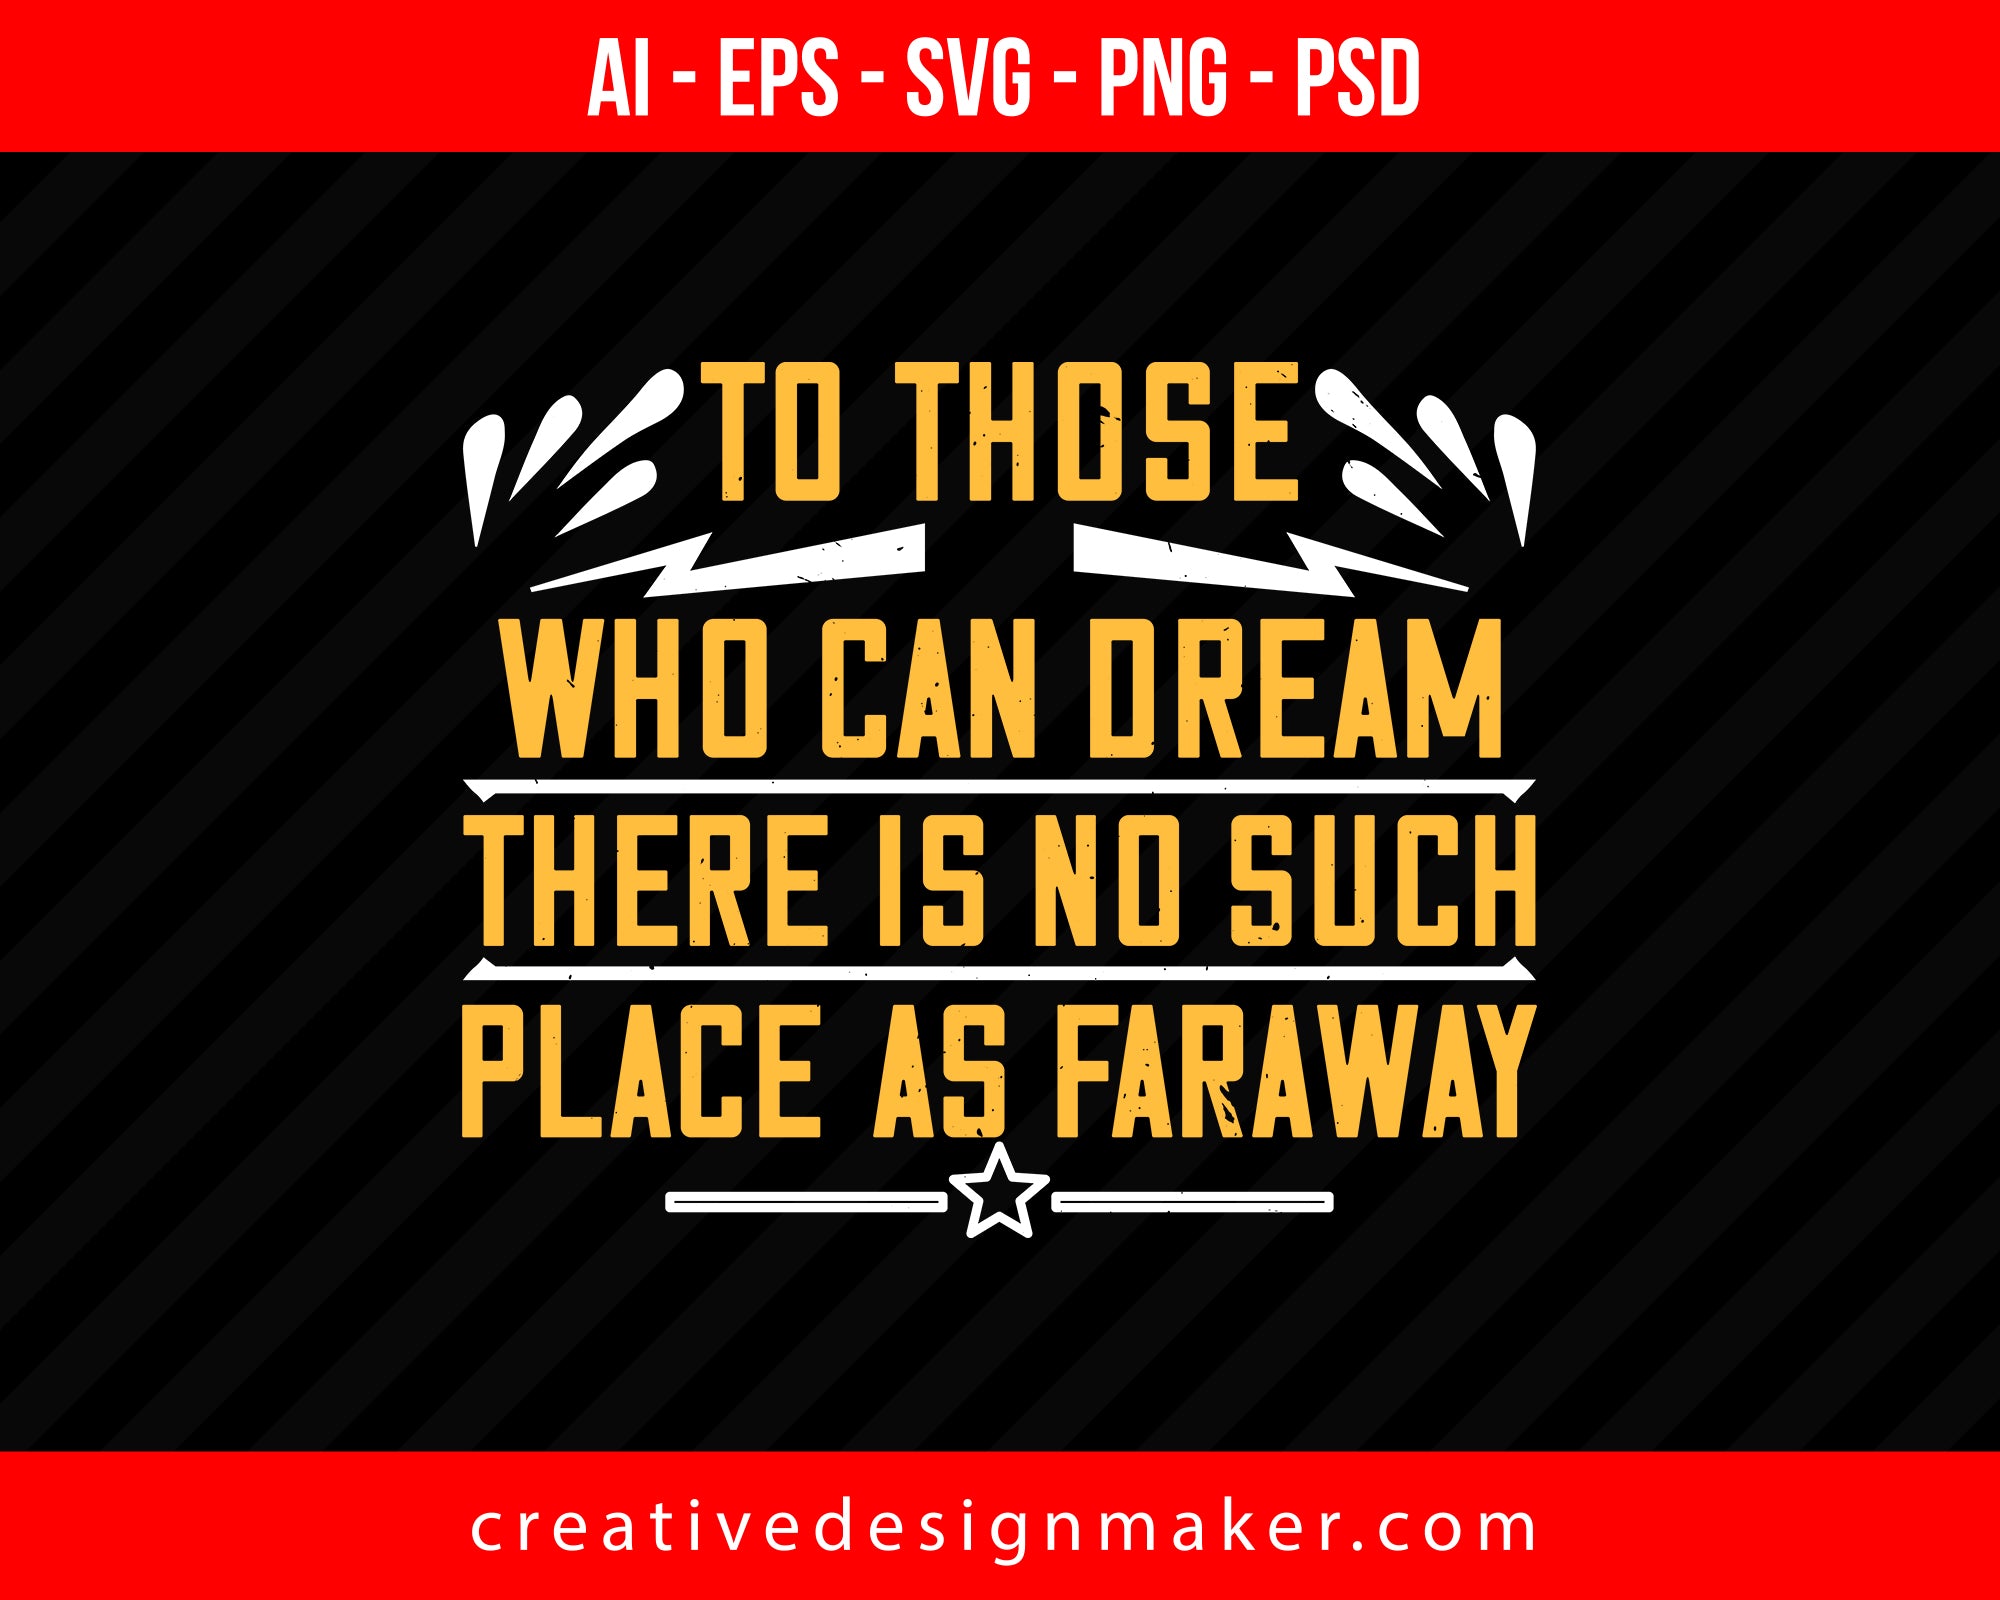 To those who can dream there is no such place as faraway Women's Day Print Ready Editable T-Shirt SVG Design!